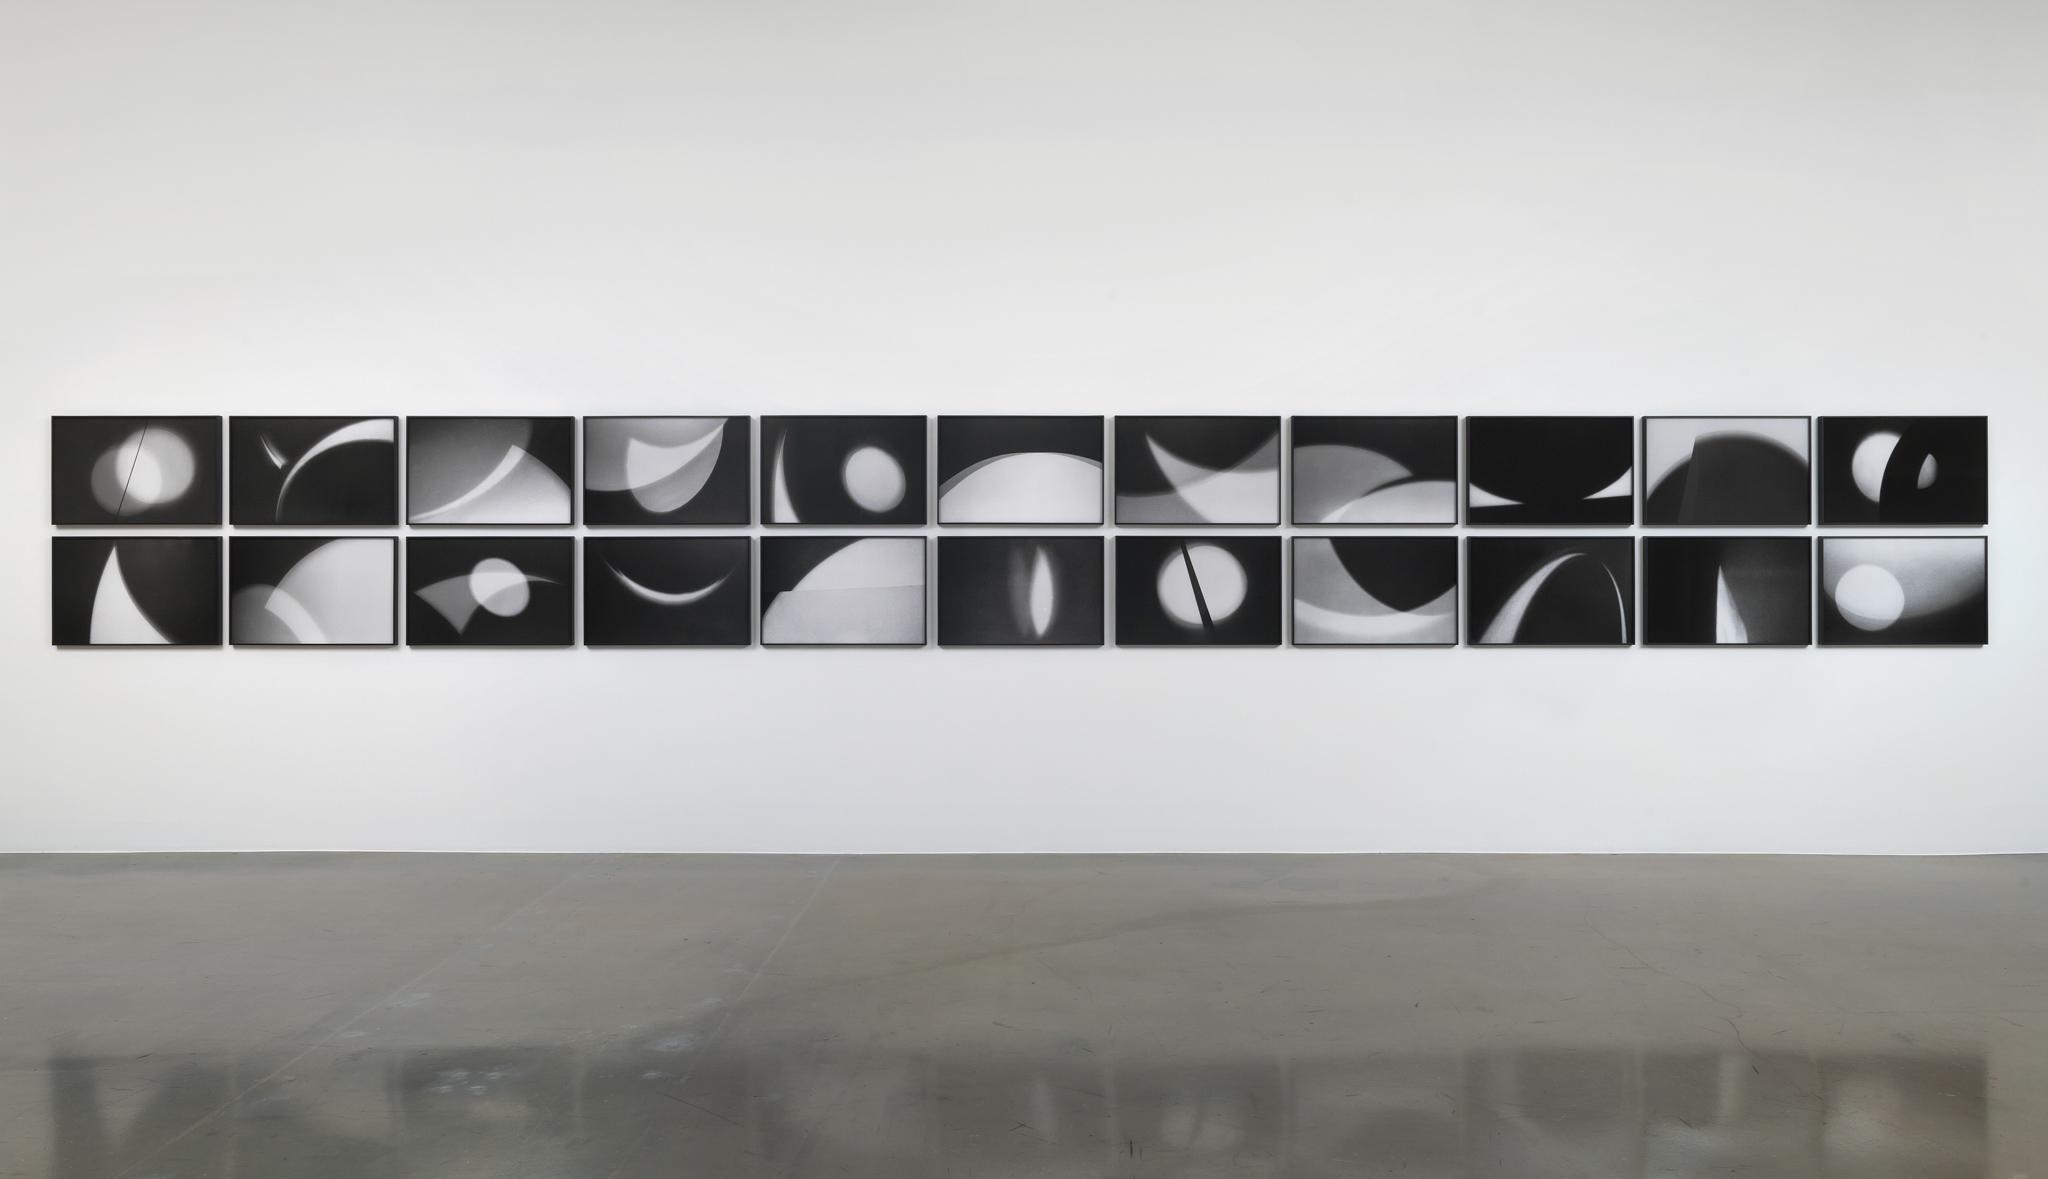 Nancy Holt's light and shadow photo drawings displayed on a gallery wall